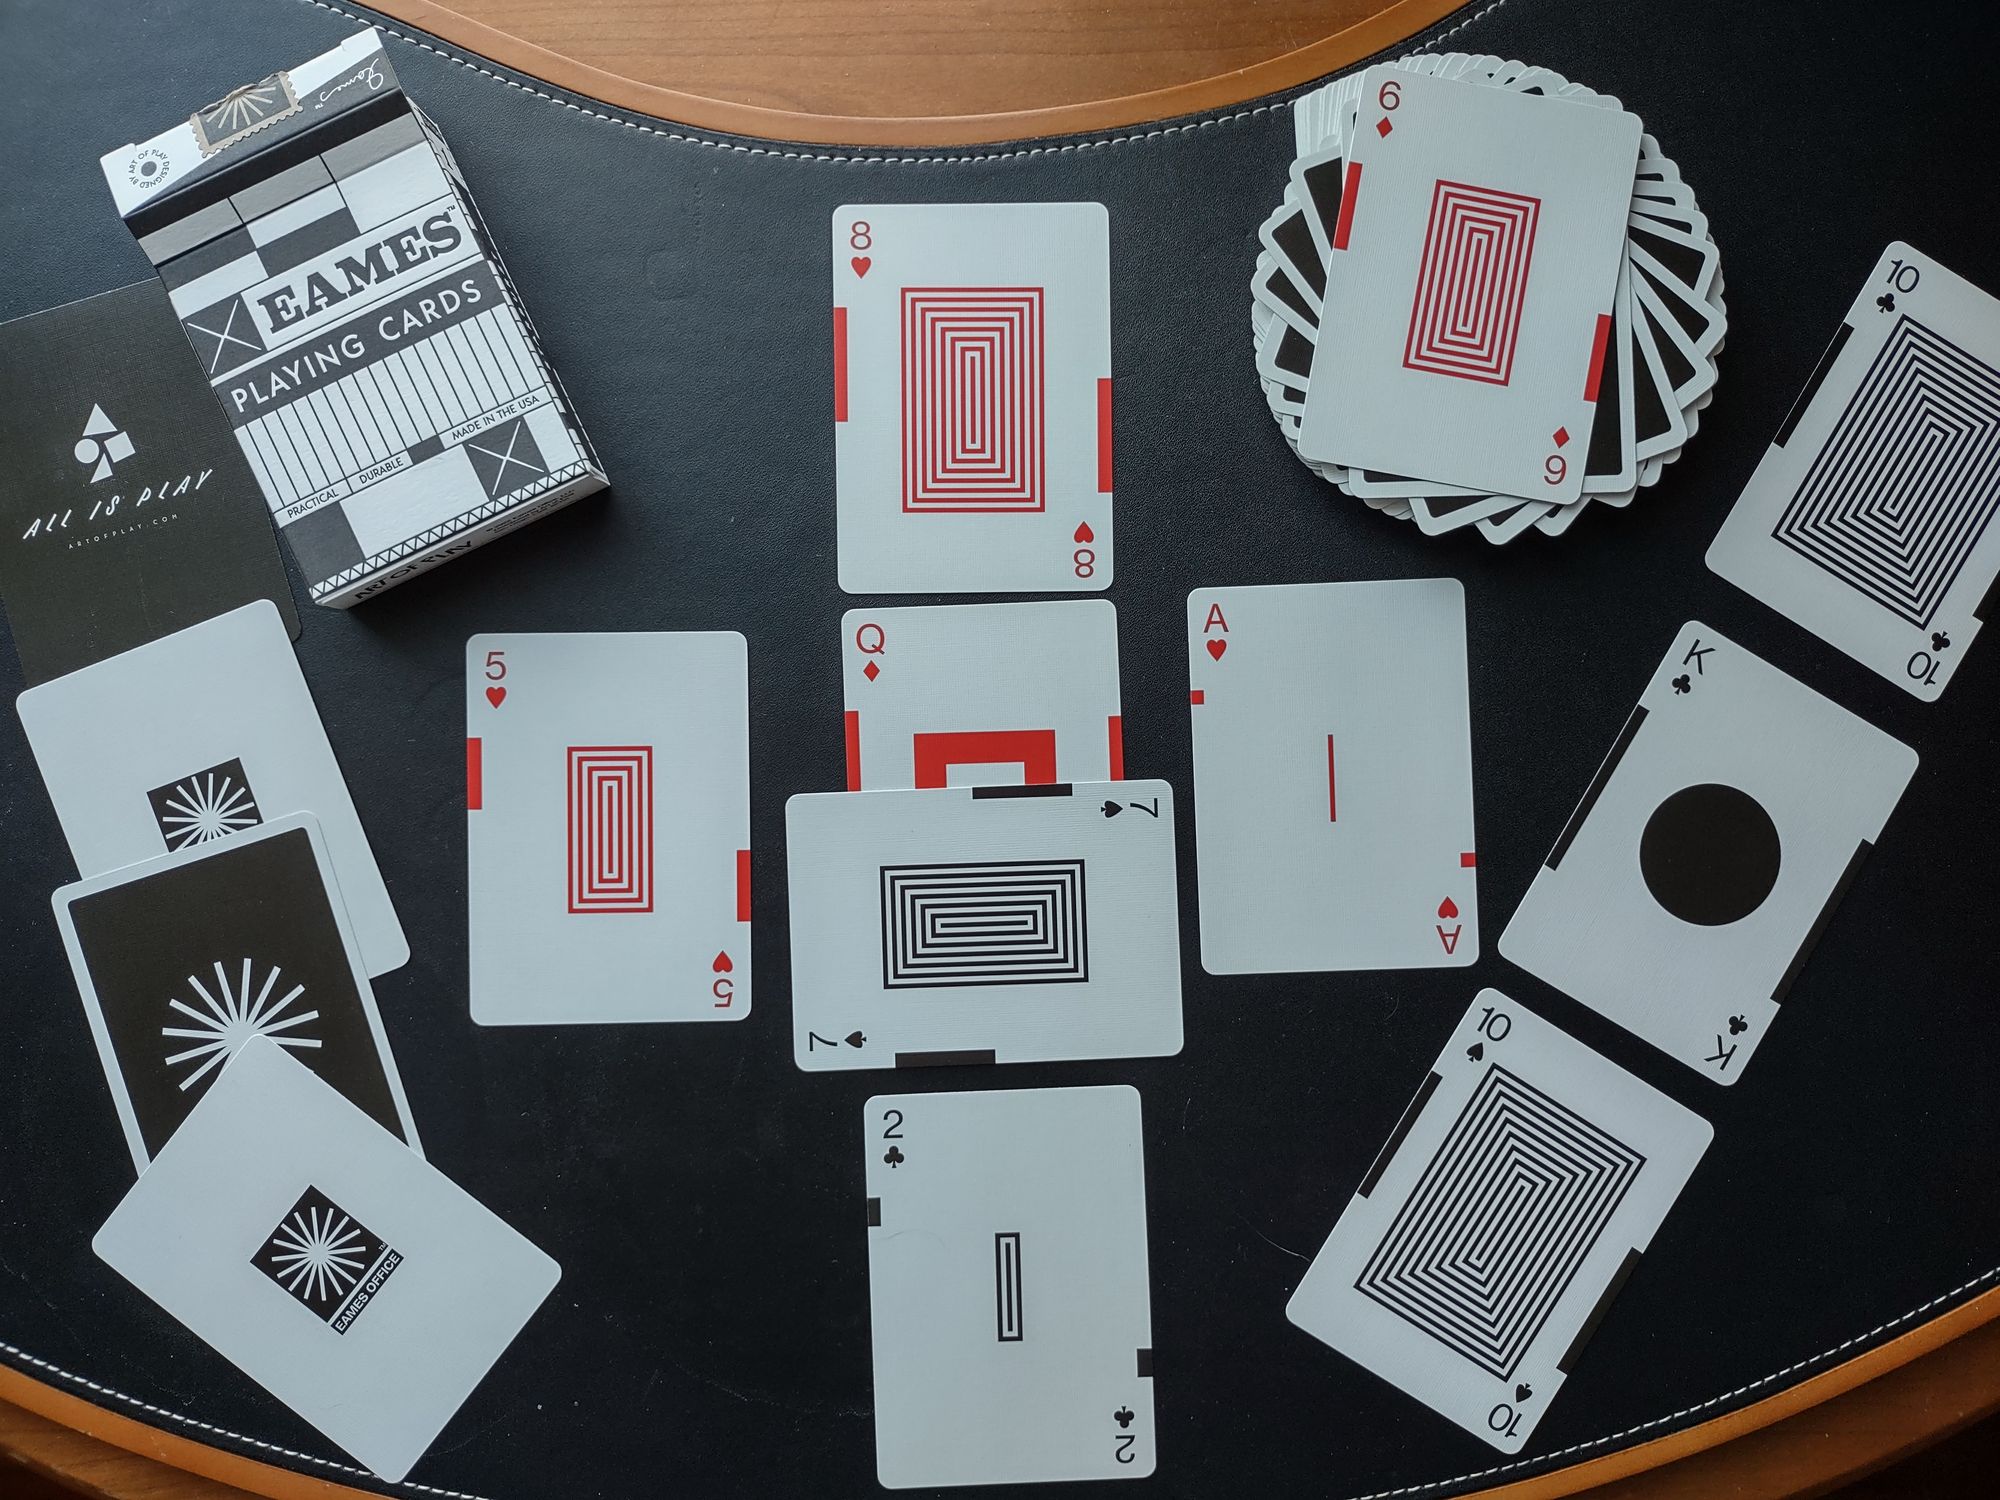 6 of diamonds. From the Eames Starburst deck by Art of Play.